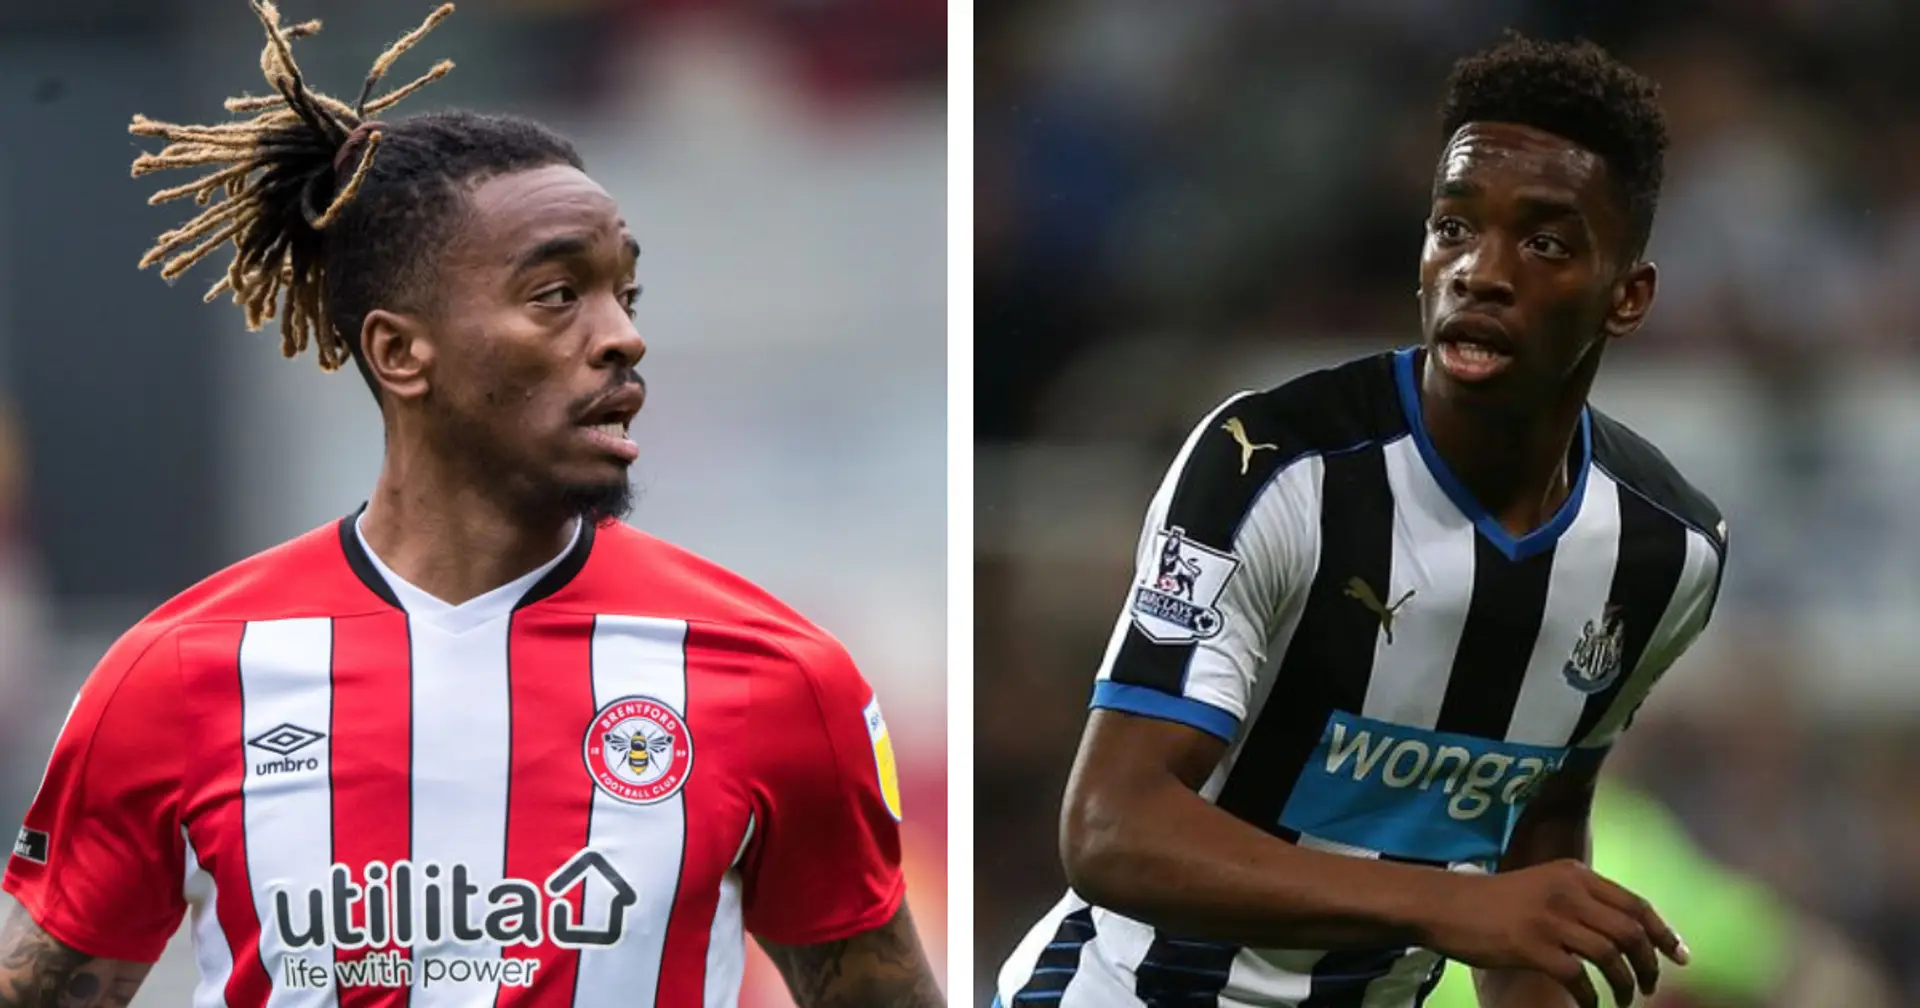 Newcastle ready to spend £30m Ivan Toney — they sold him 4 years ago for just £650k